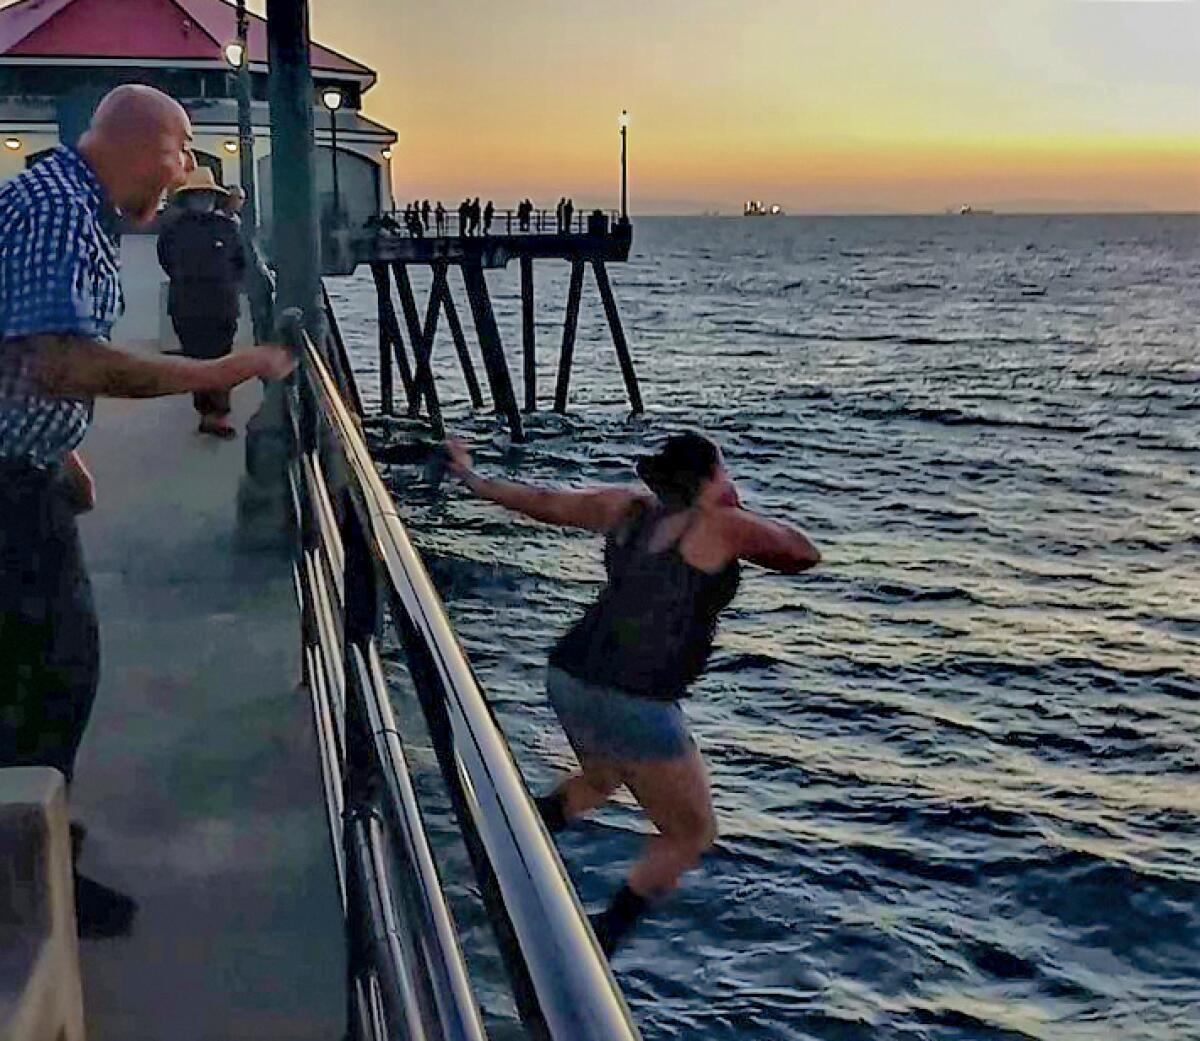 A man shouts at a woman as she jumps off a pier